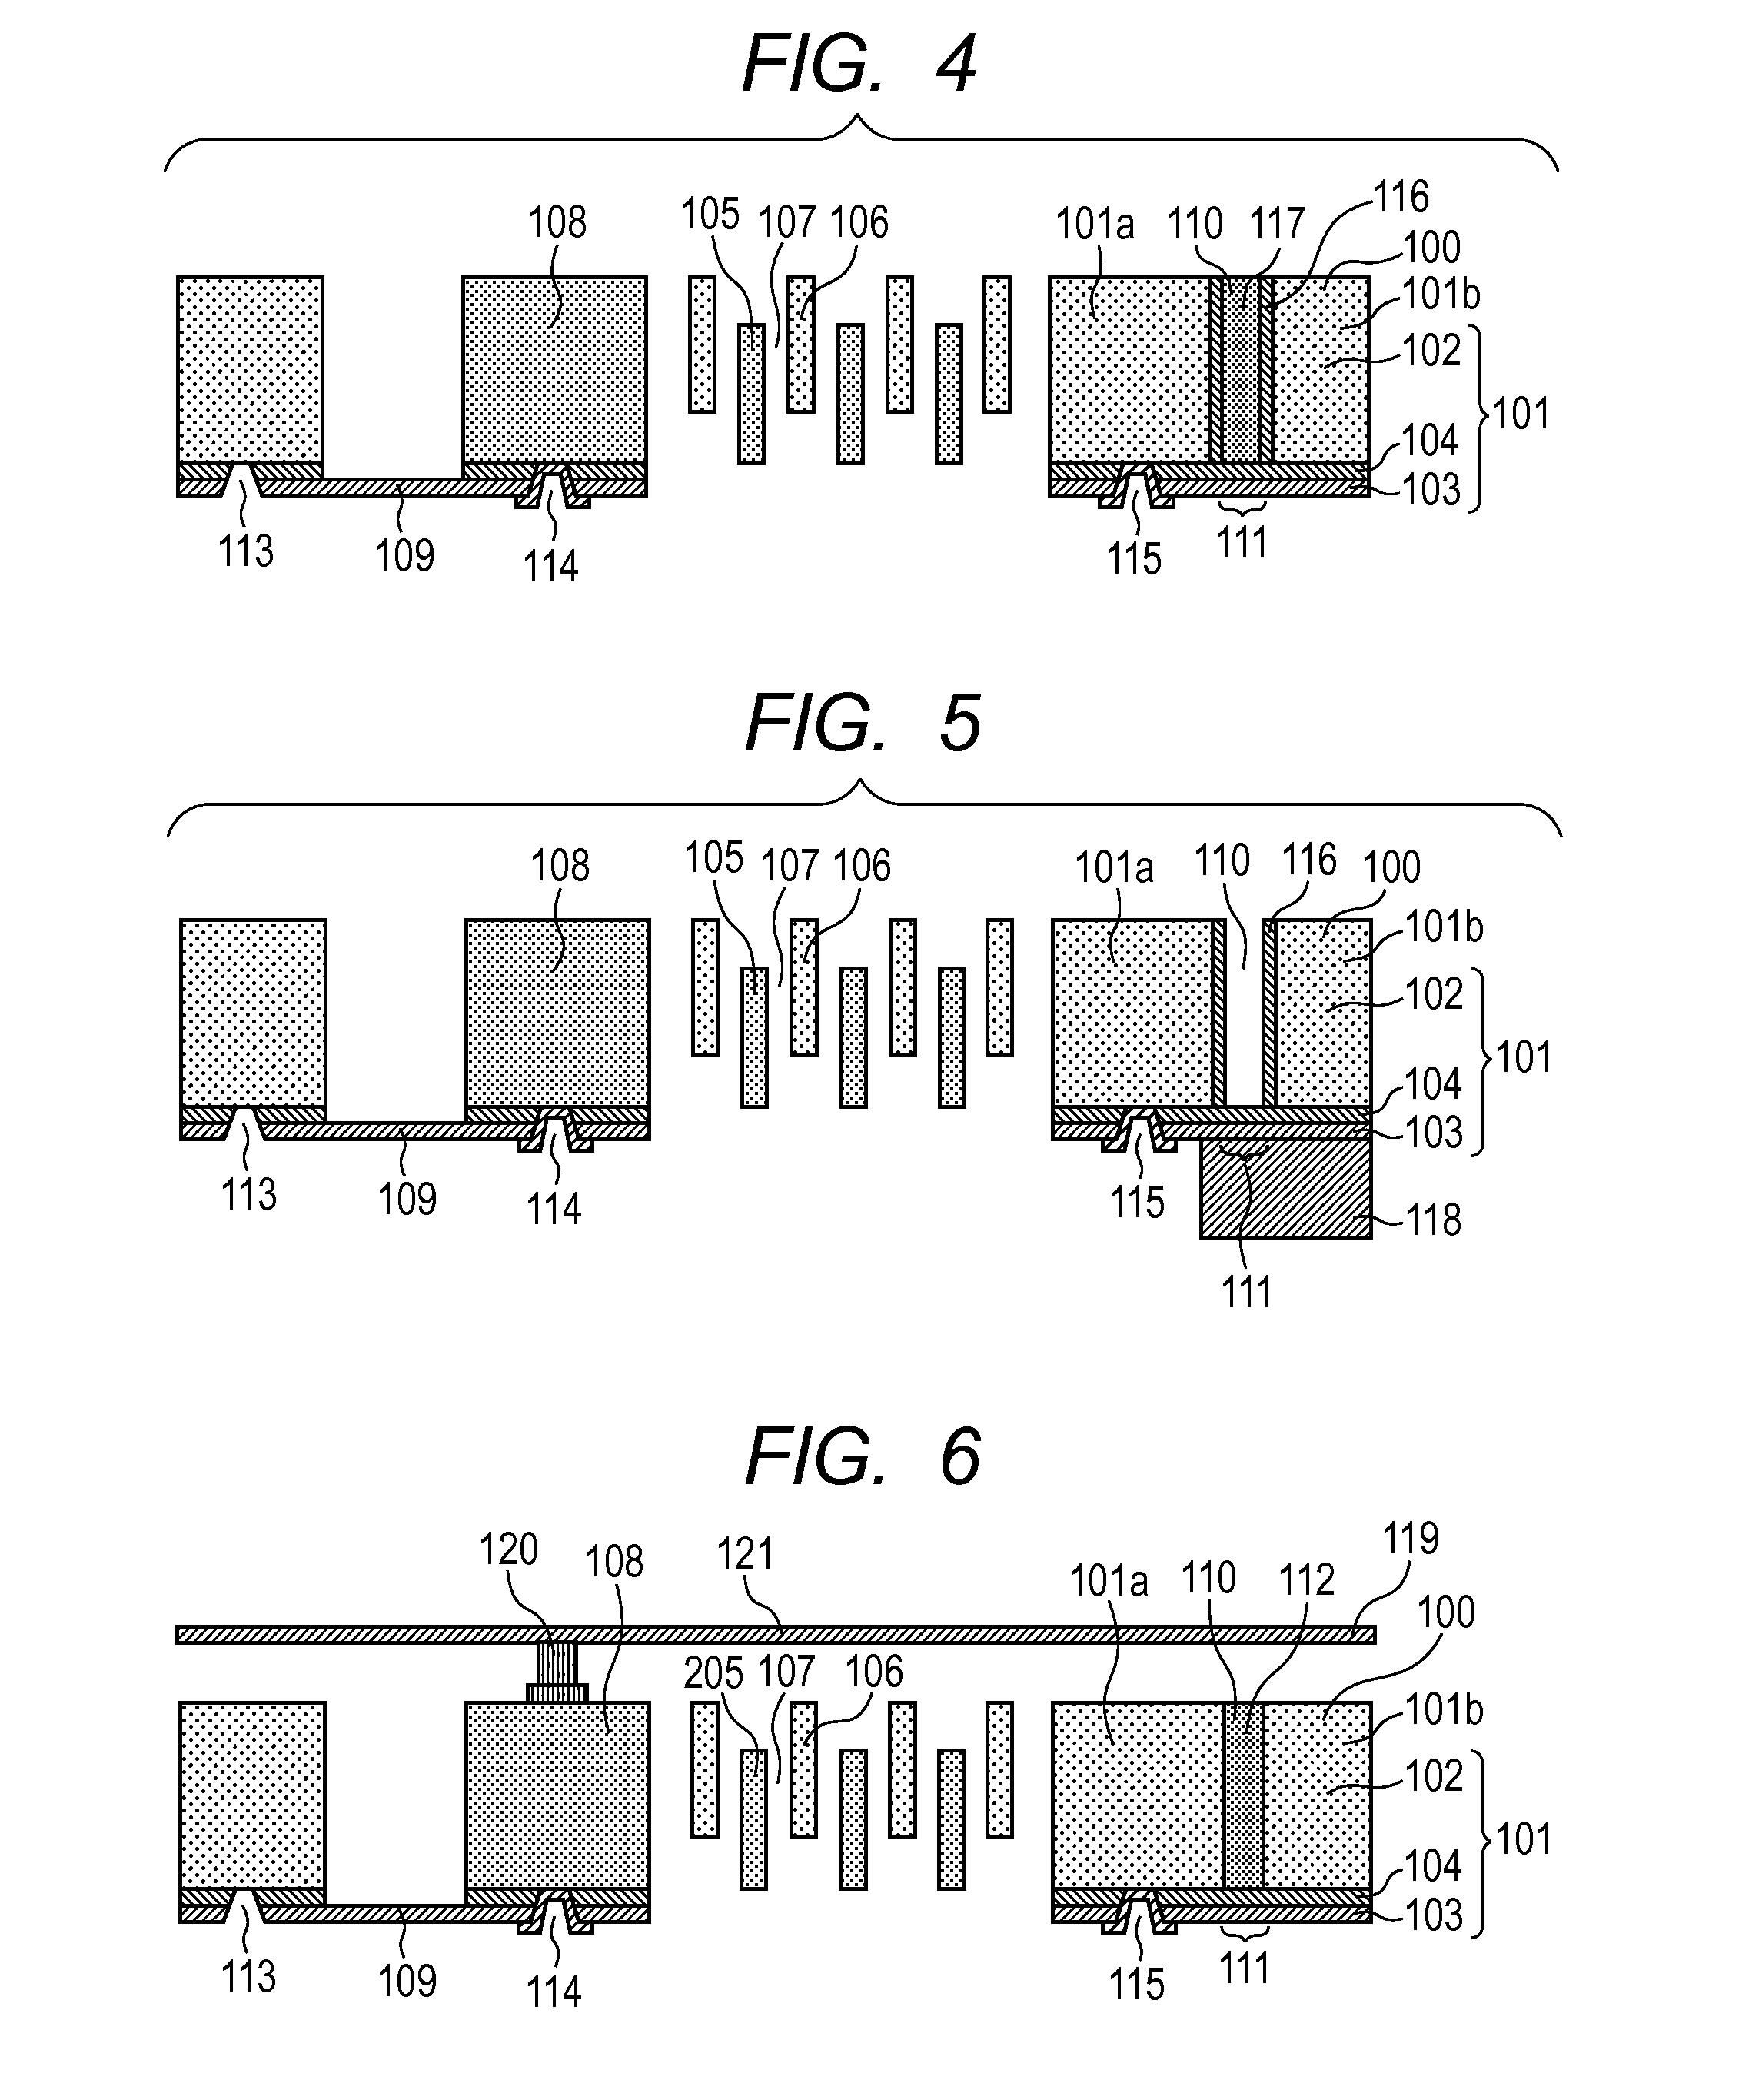 Electrostatic comb actuator, deformable mirror using the electrostatic comb actuator, adaptive optics system using the deformable mirror, and scanning laser ophthalmoscope using the adaptive optics system